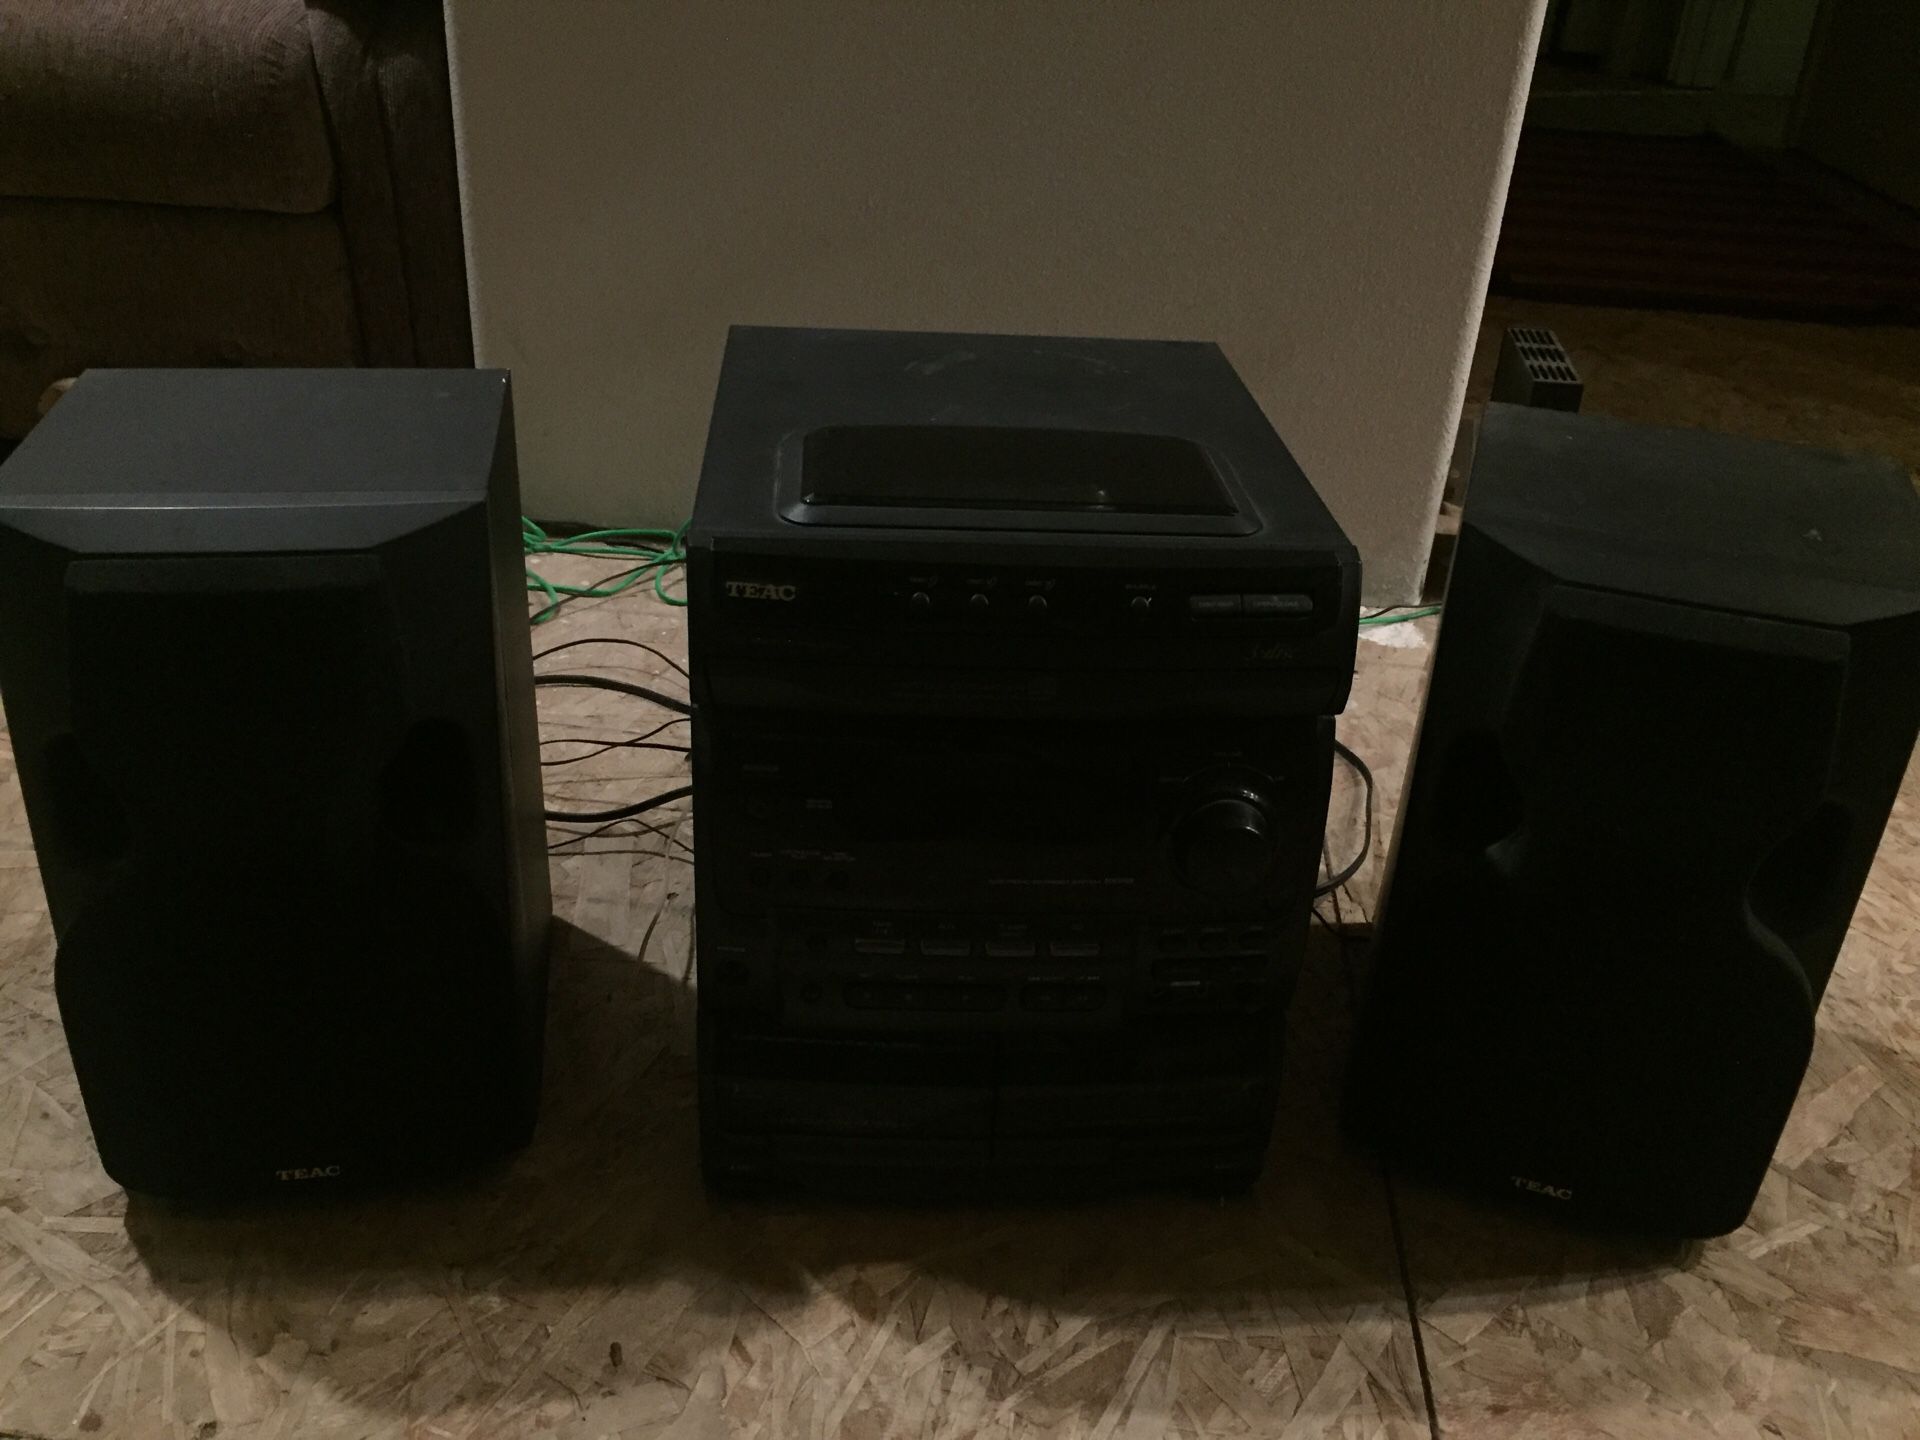 Teac AM& FM Stero. With 5 Disc CD player & 2 Speaker works